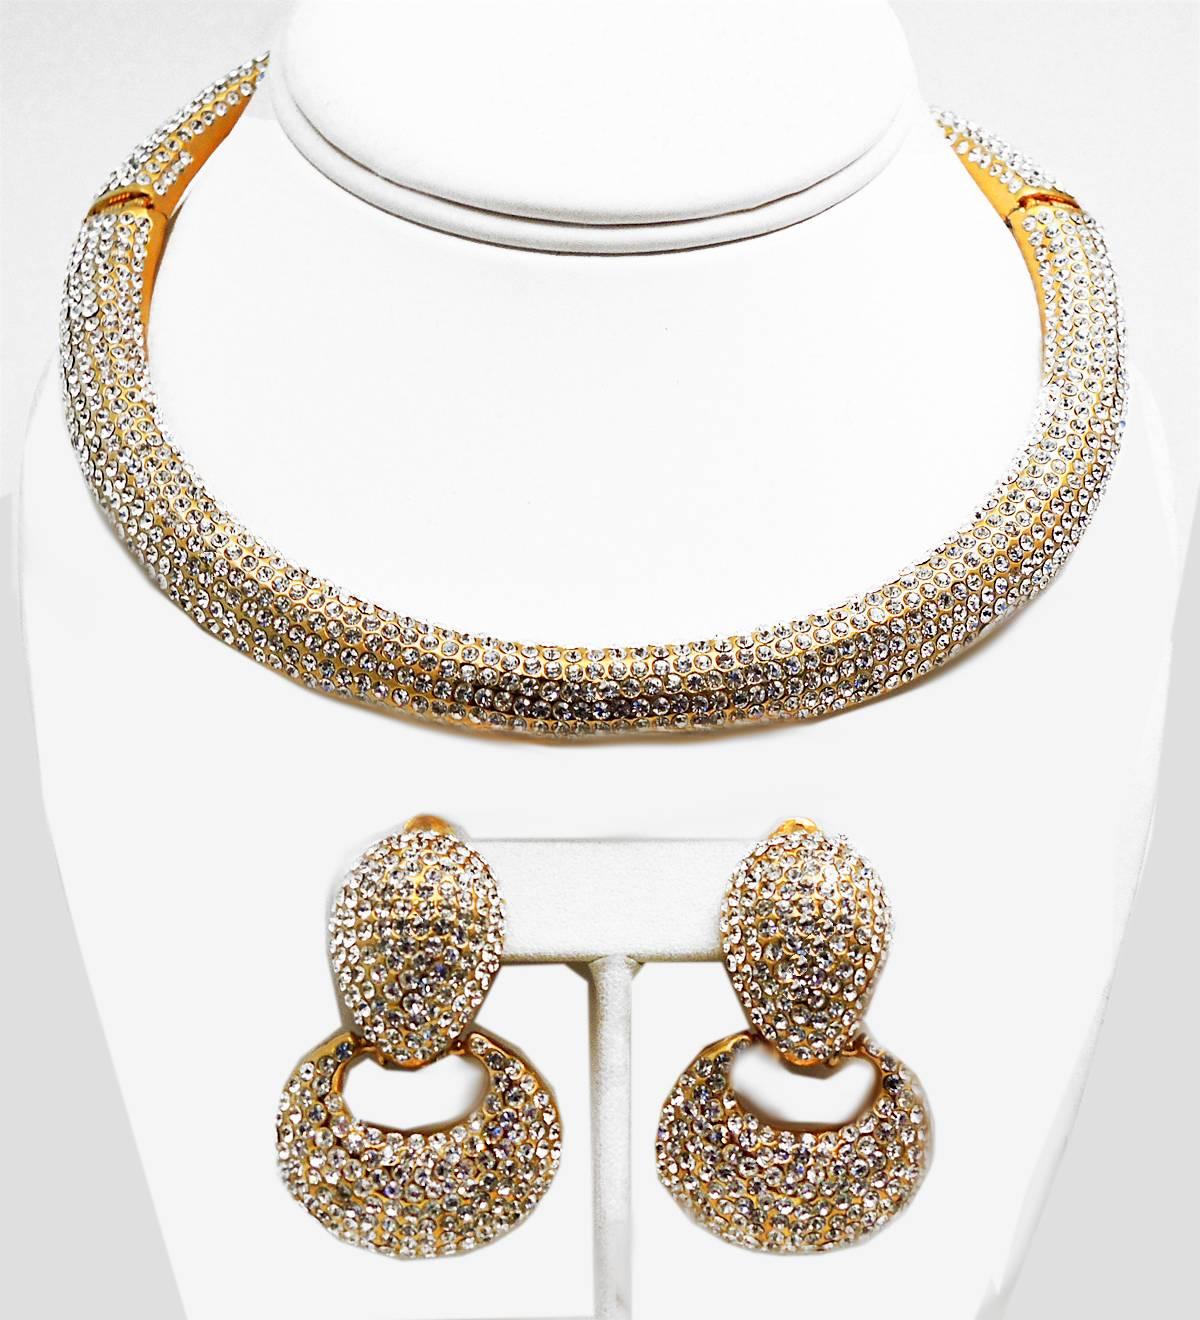 Jarin is a jeweler’s jeweler!  This is a vintage signed “JARIN NYC” set, which are extremely hard to find and this stunning set is no exception!  It has striking clear crystals in a gold-tone setting. The Collier De Chien necklace has a hinged